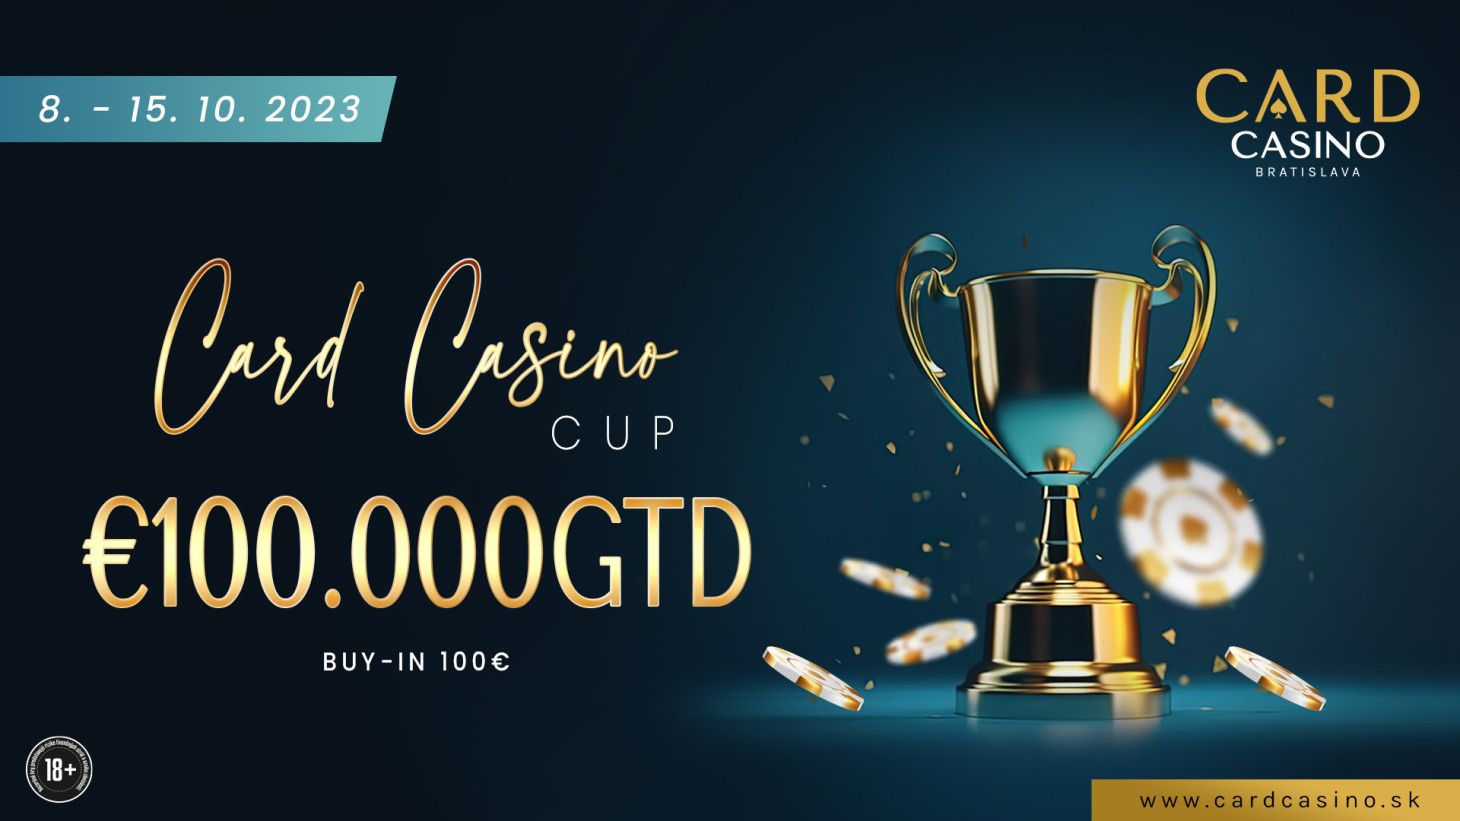 €100,000 Card Casino Cup to be played in October